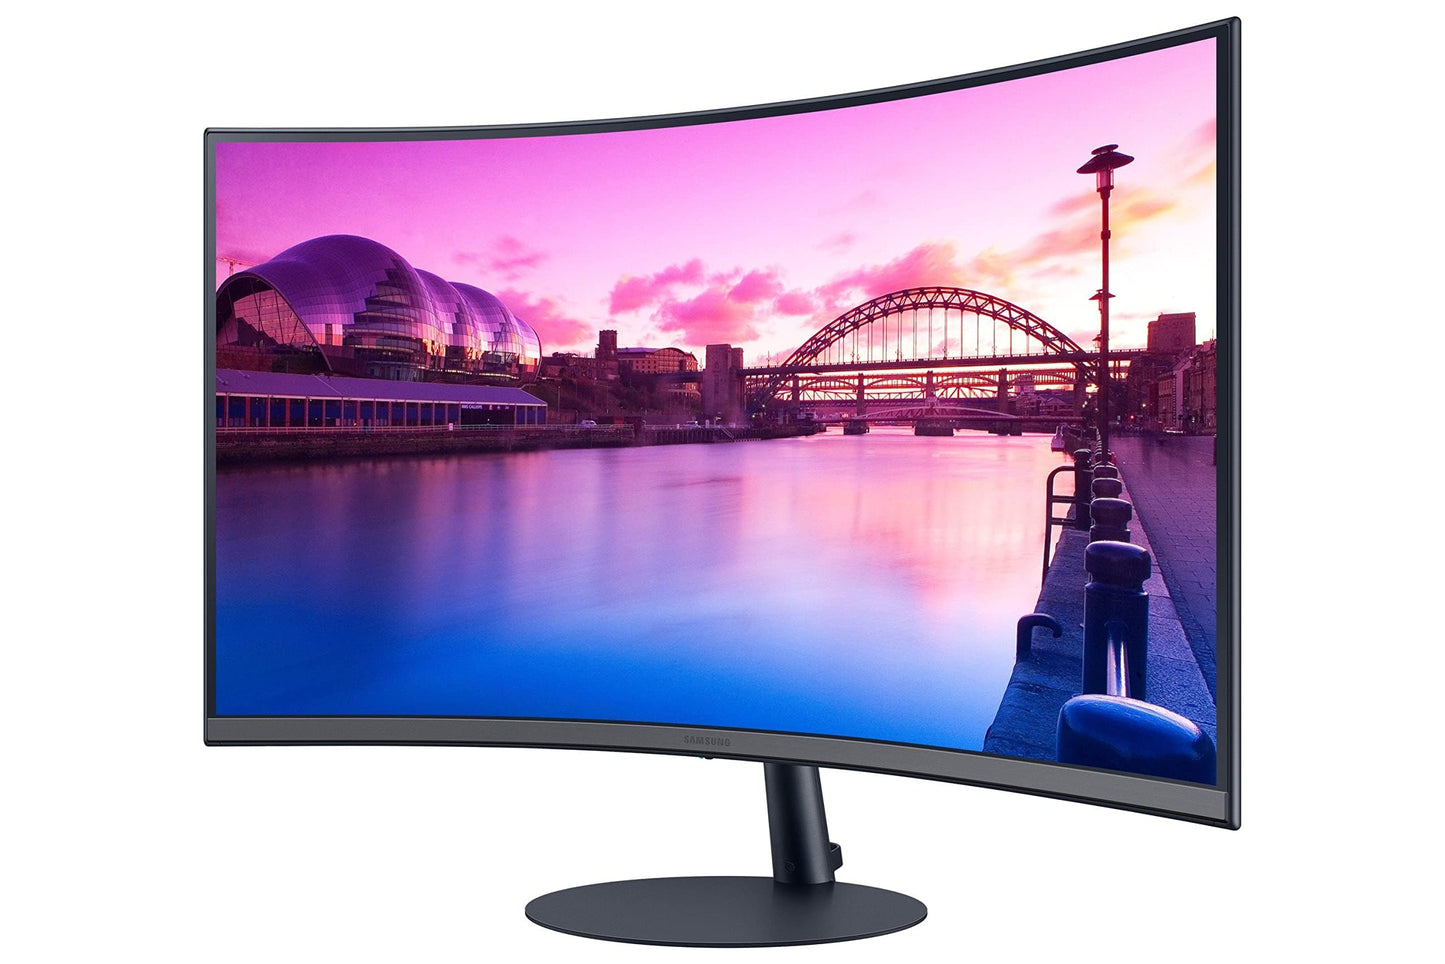 Samsung 32" LS32C390, Curved Monitor With 1000R Curvature, 75Hz Refresh Rate & 4ms Response Time, Built-in Speaker, AMD FreeSync - LS32C390EAMXUE